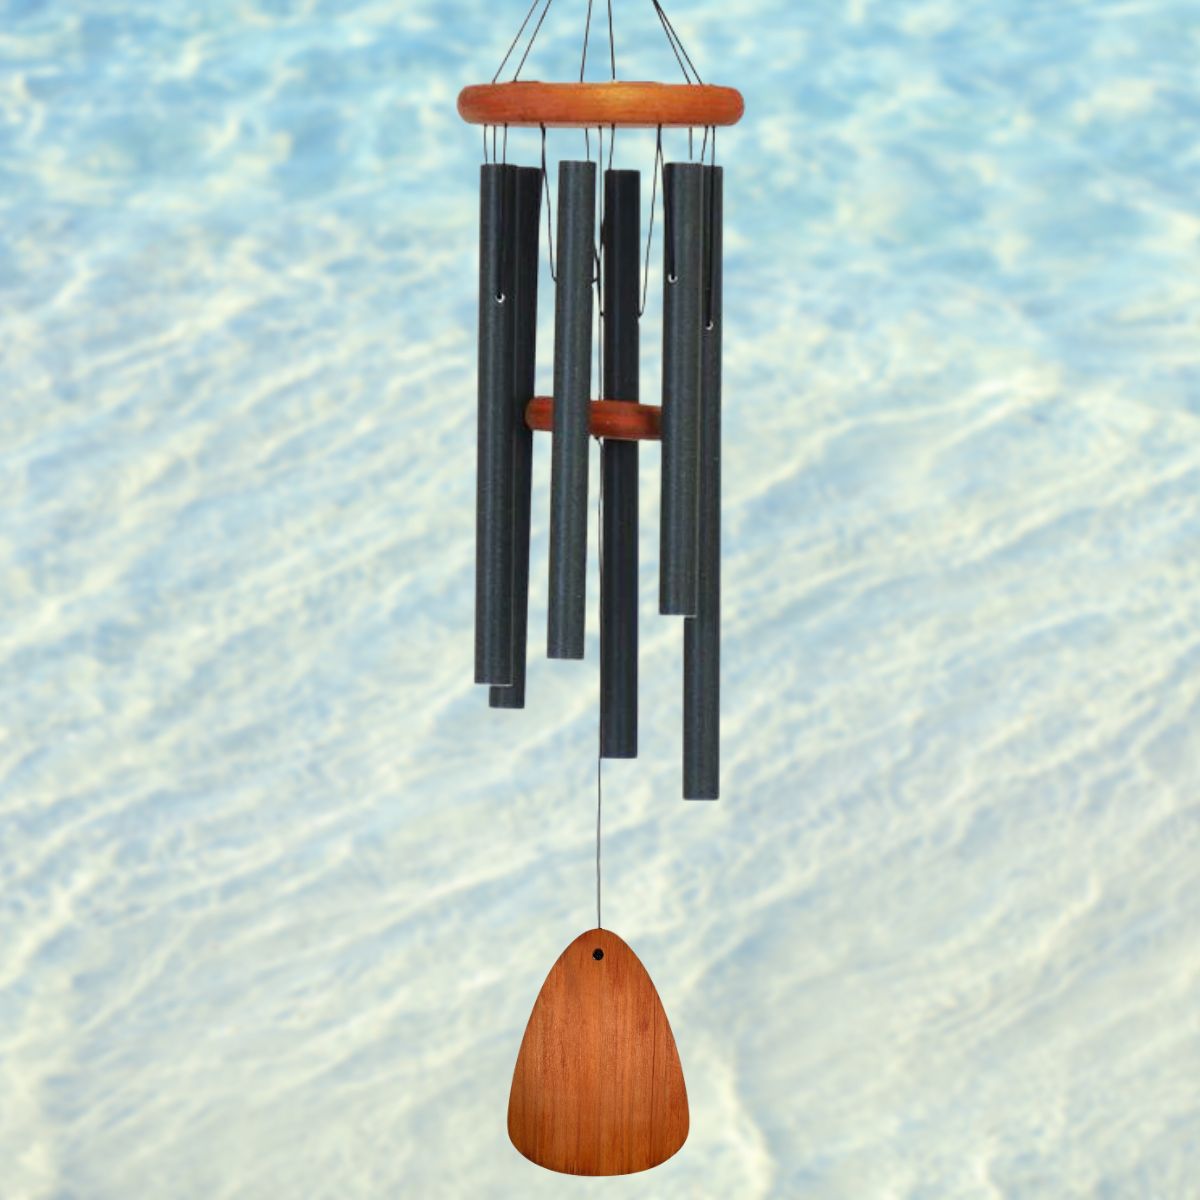 Festival 18-inch 6-Tube Wind chime in Forest Green